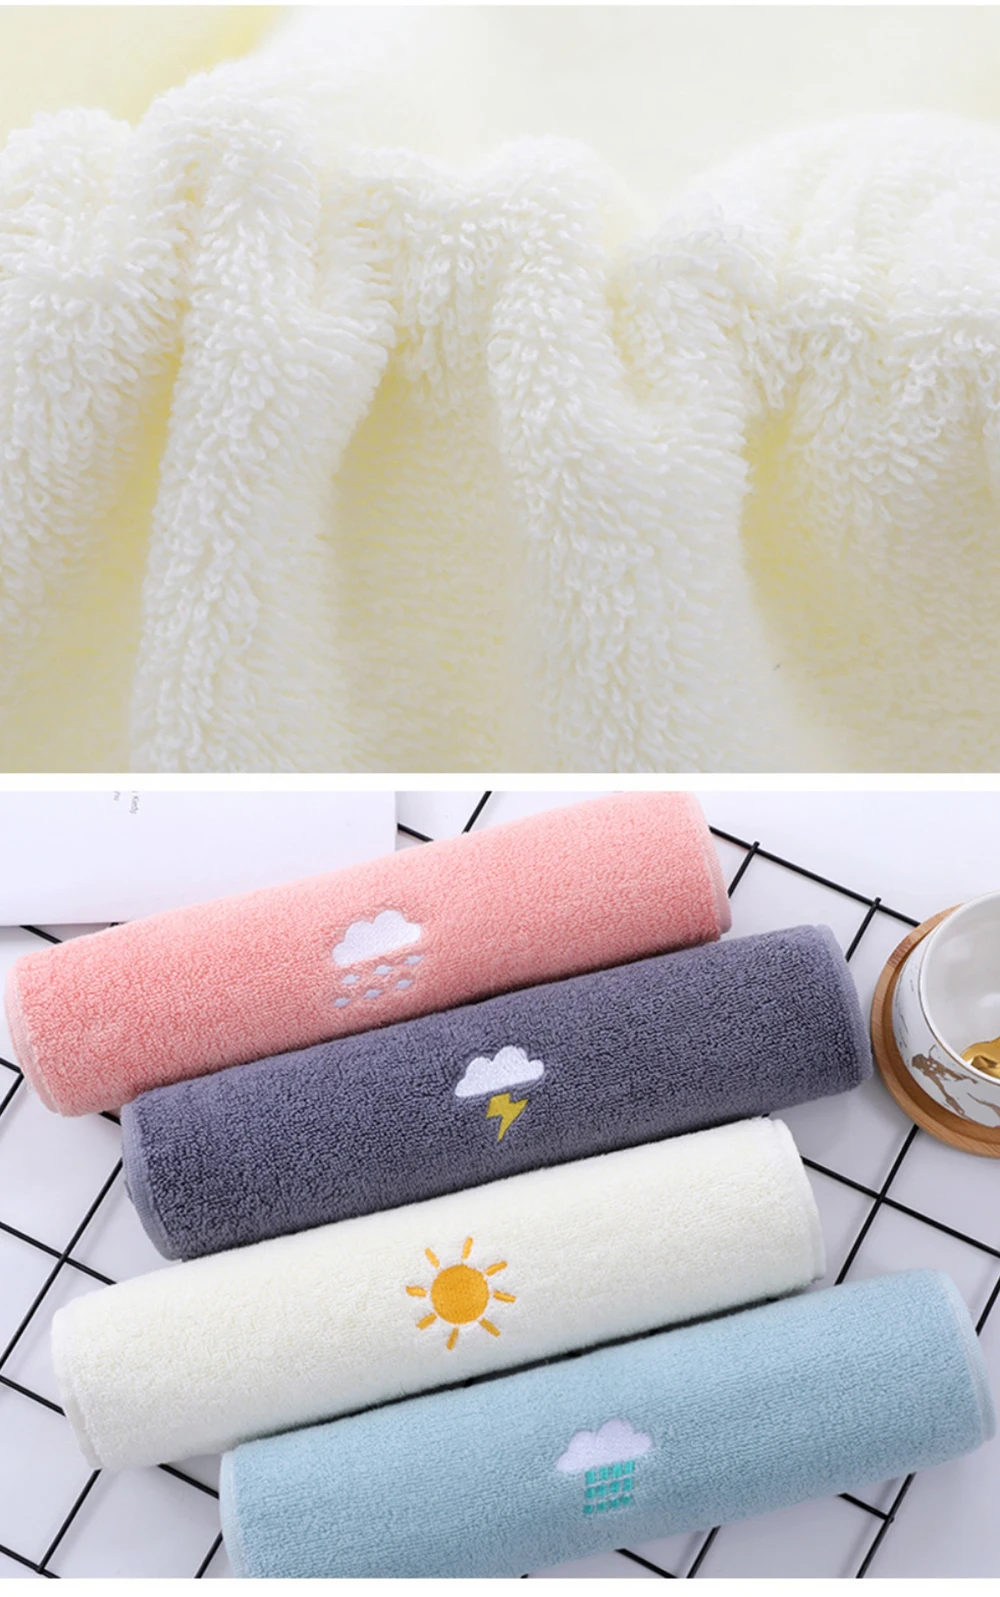 Embroidery Cotton Towels Bath Sheet Face Towel Hand Cloth Solid Color 33*73cm 